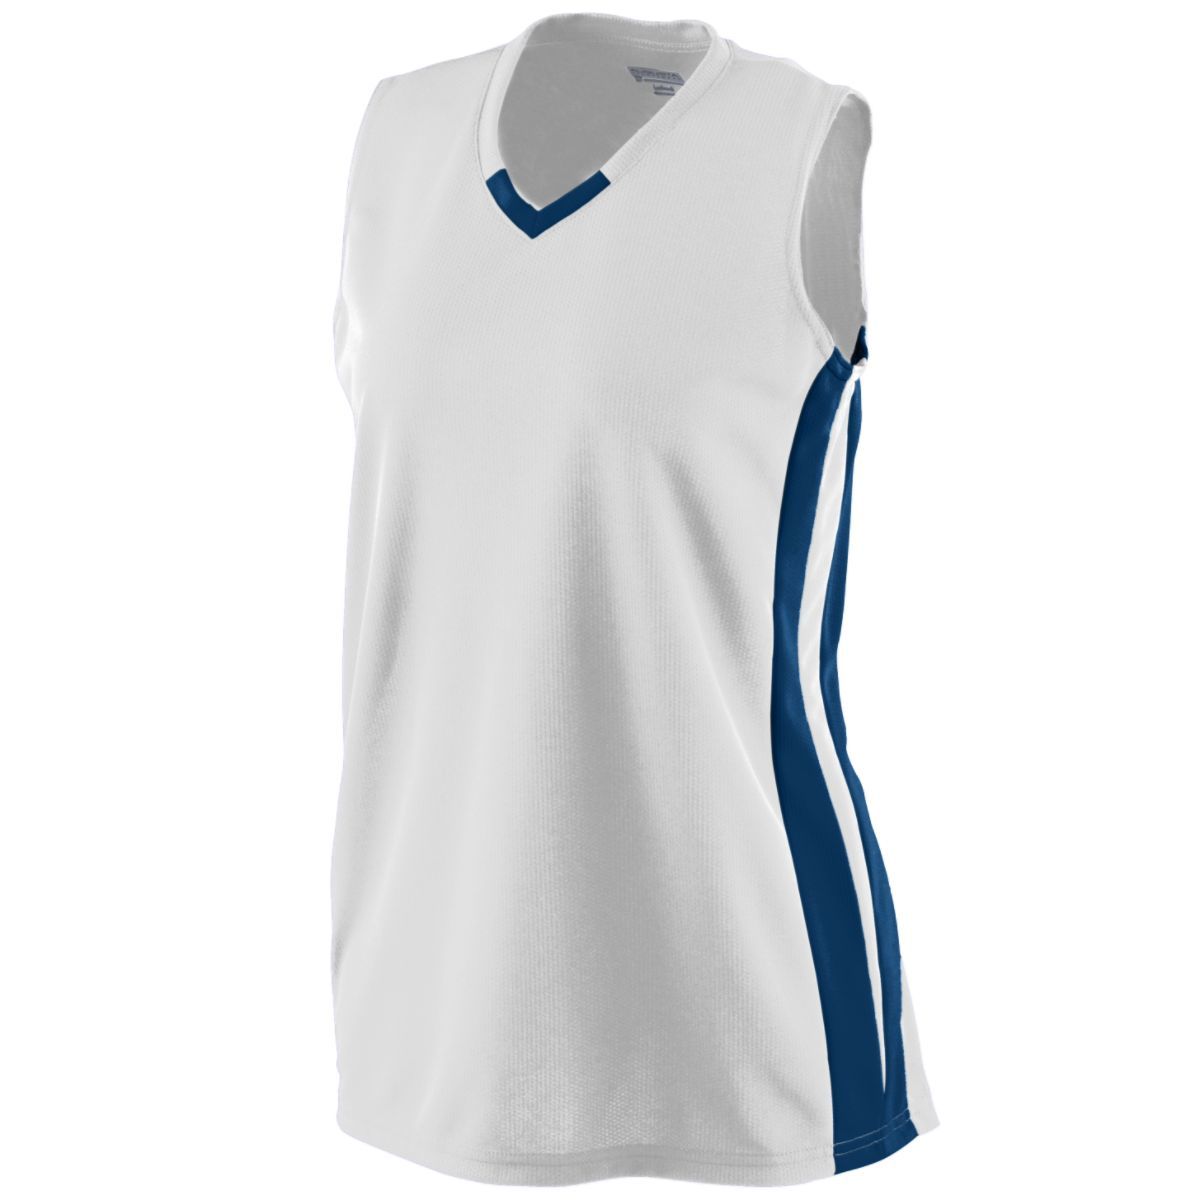 Augusta Sportswear Ladies Wicking Mesh Powerhouse Jersey in White/Navy  -Part of the Ladies, Ladies-Jersey, Augusta-Products, Softball, Shirts product lines at KanaleyCreations.com